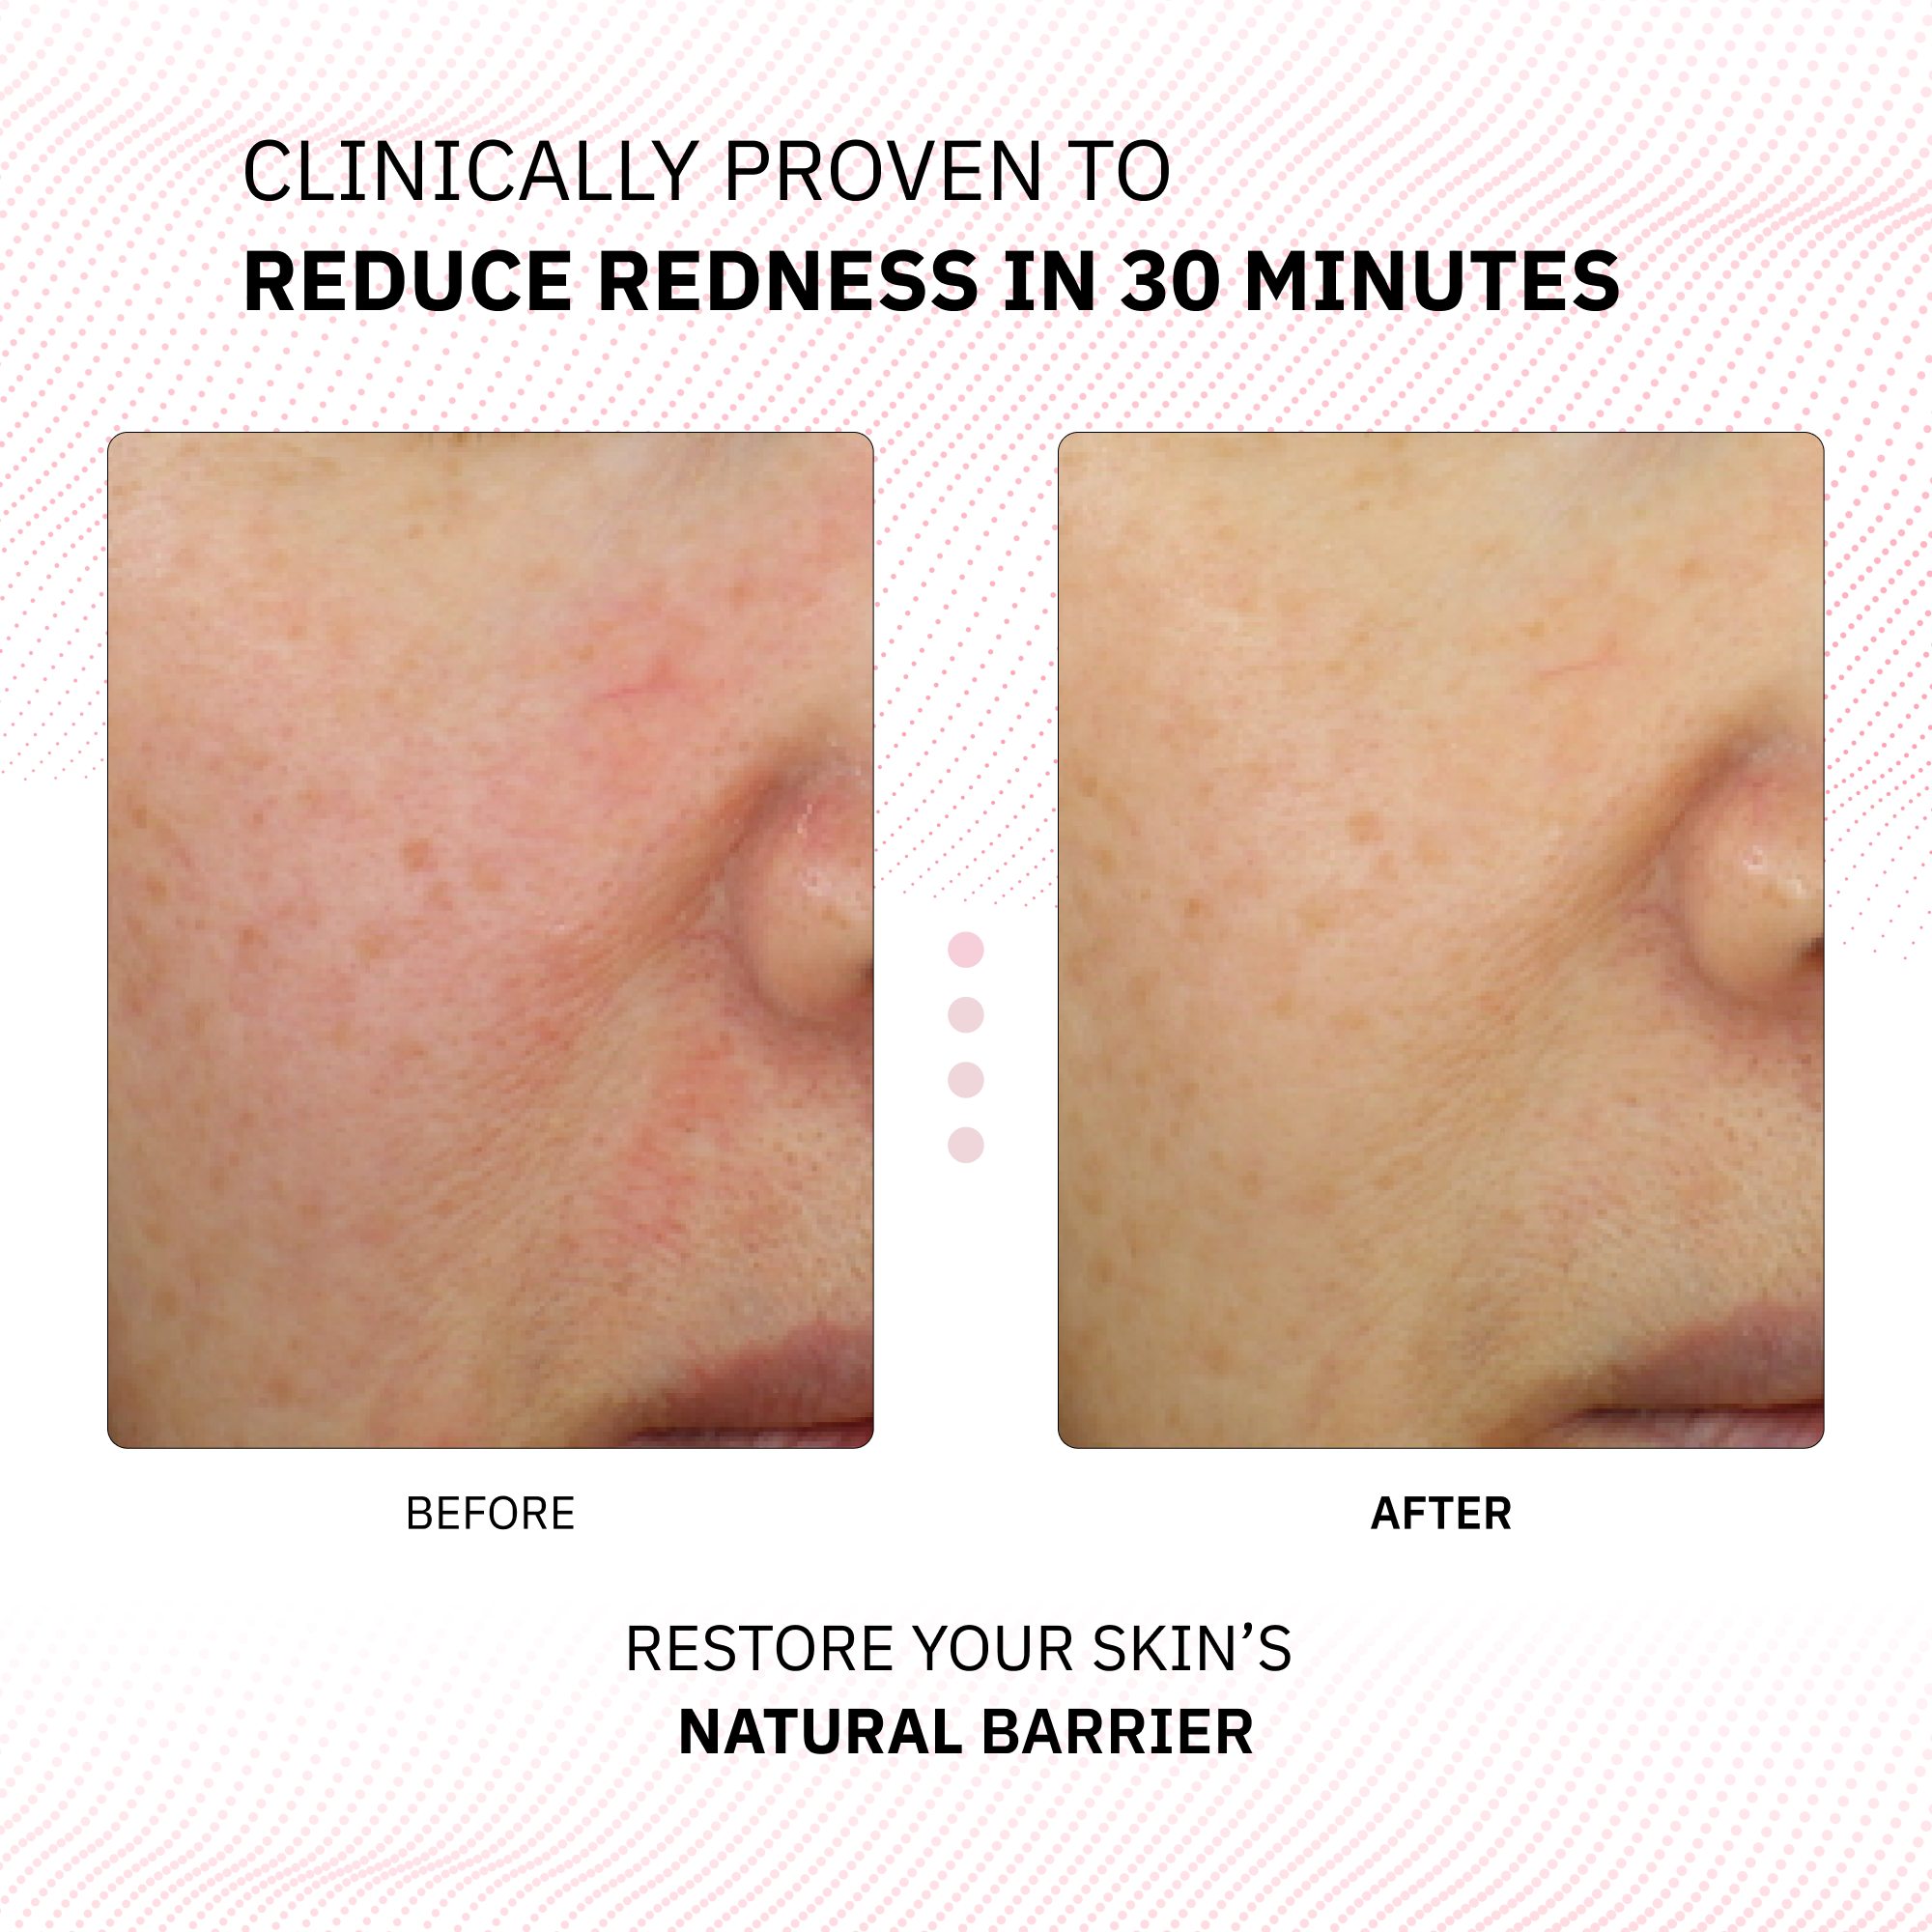 A before-and-after image of face skin looking clean and healthy after using Physiogel Calming Relief.